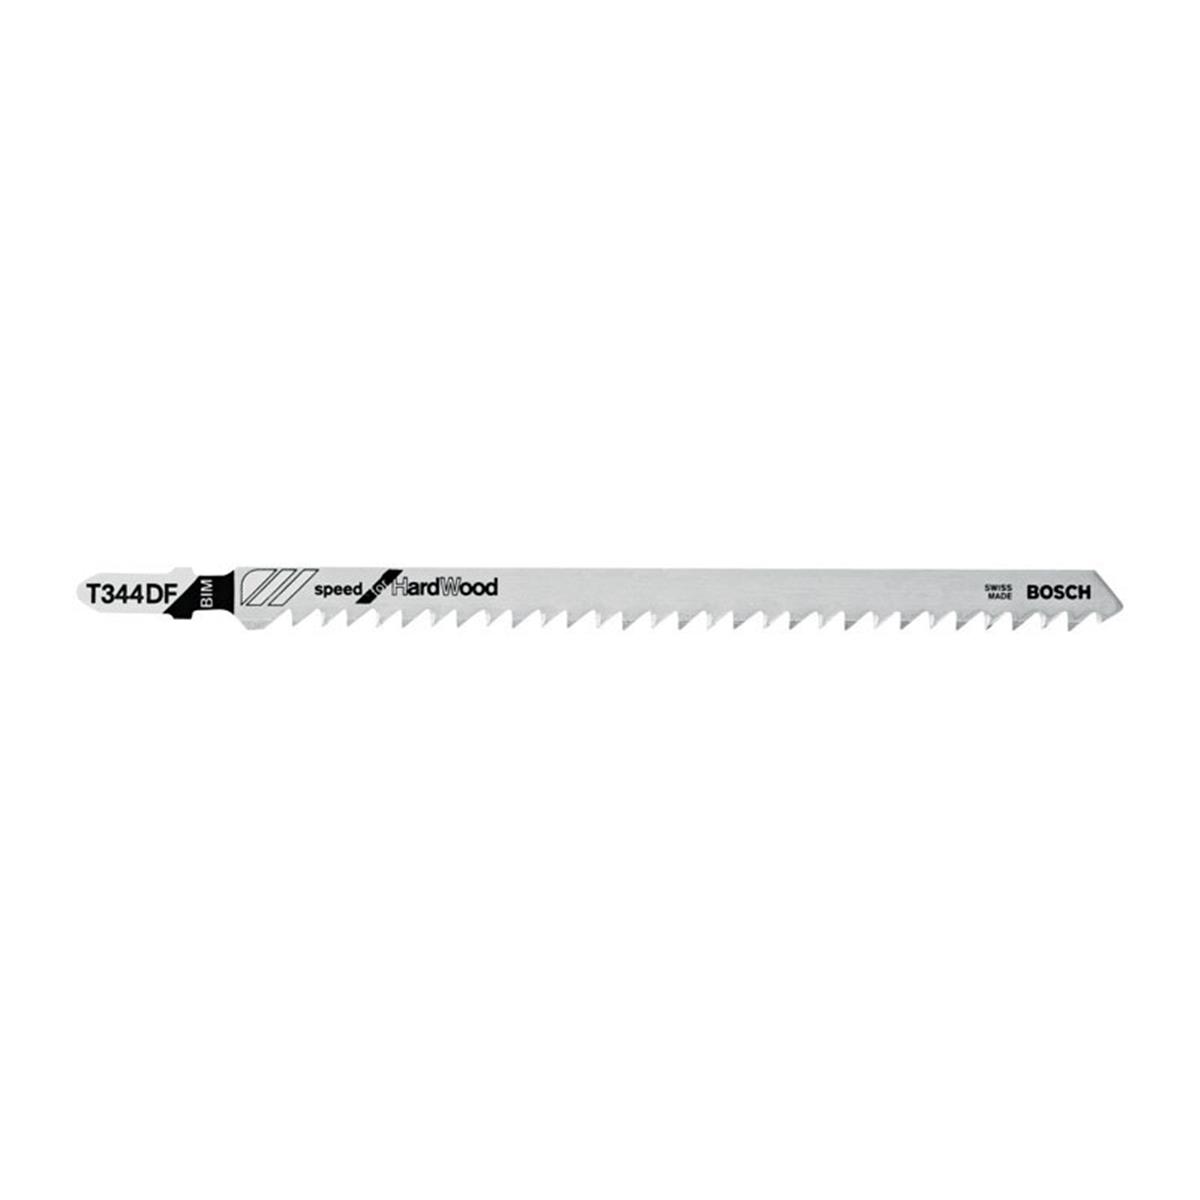 Picture of Bosch 2685808 6 in. Bi-Metal T-Shank Side set & ground Jig Saw Blade - 6 TPI - Pack of 5